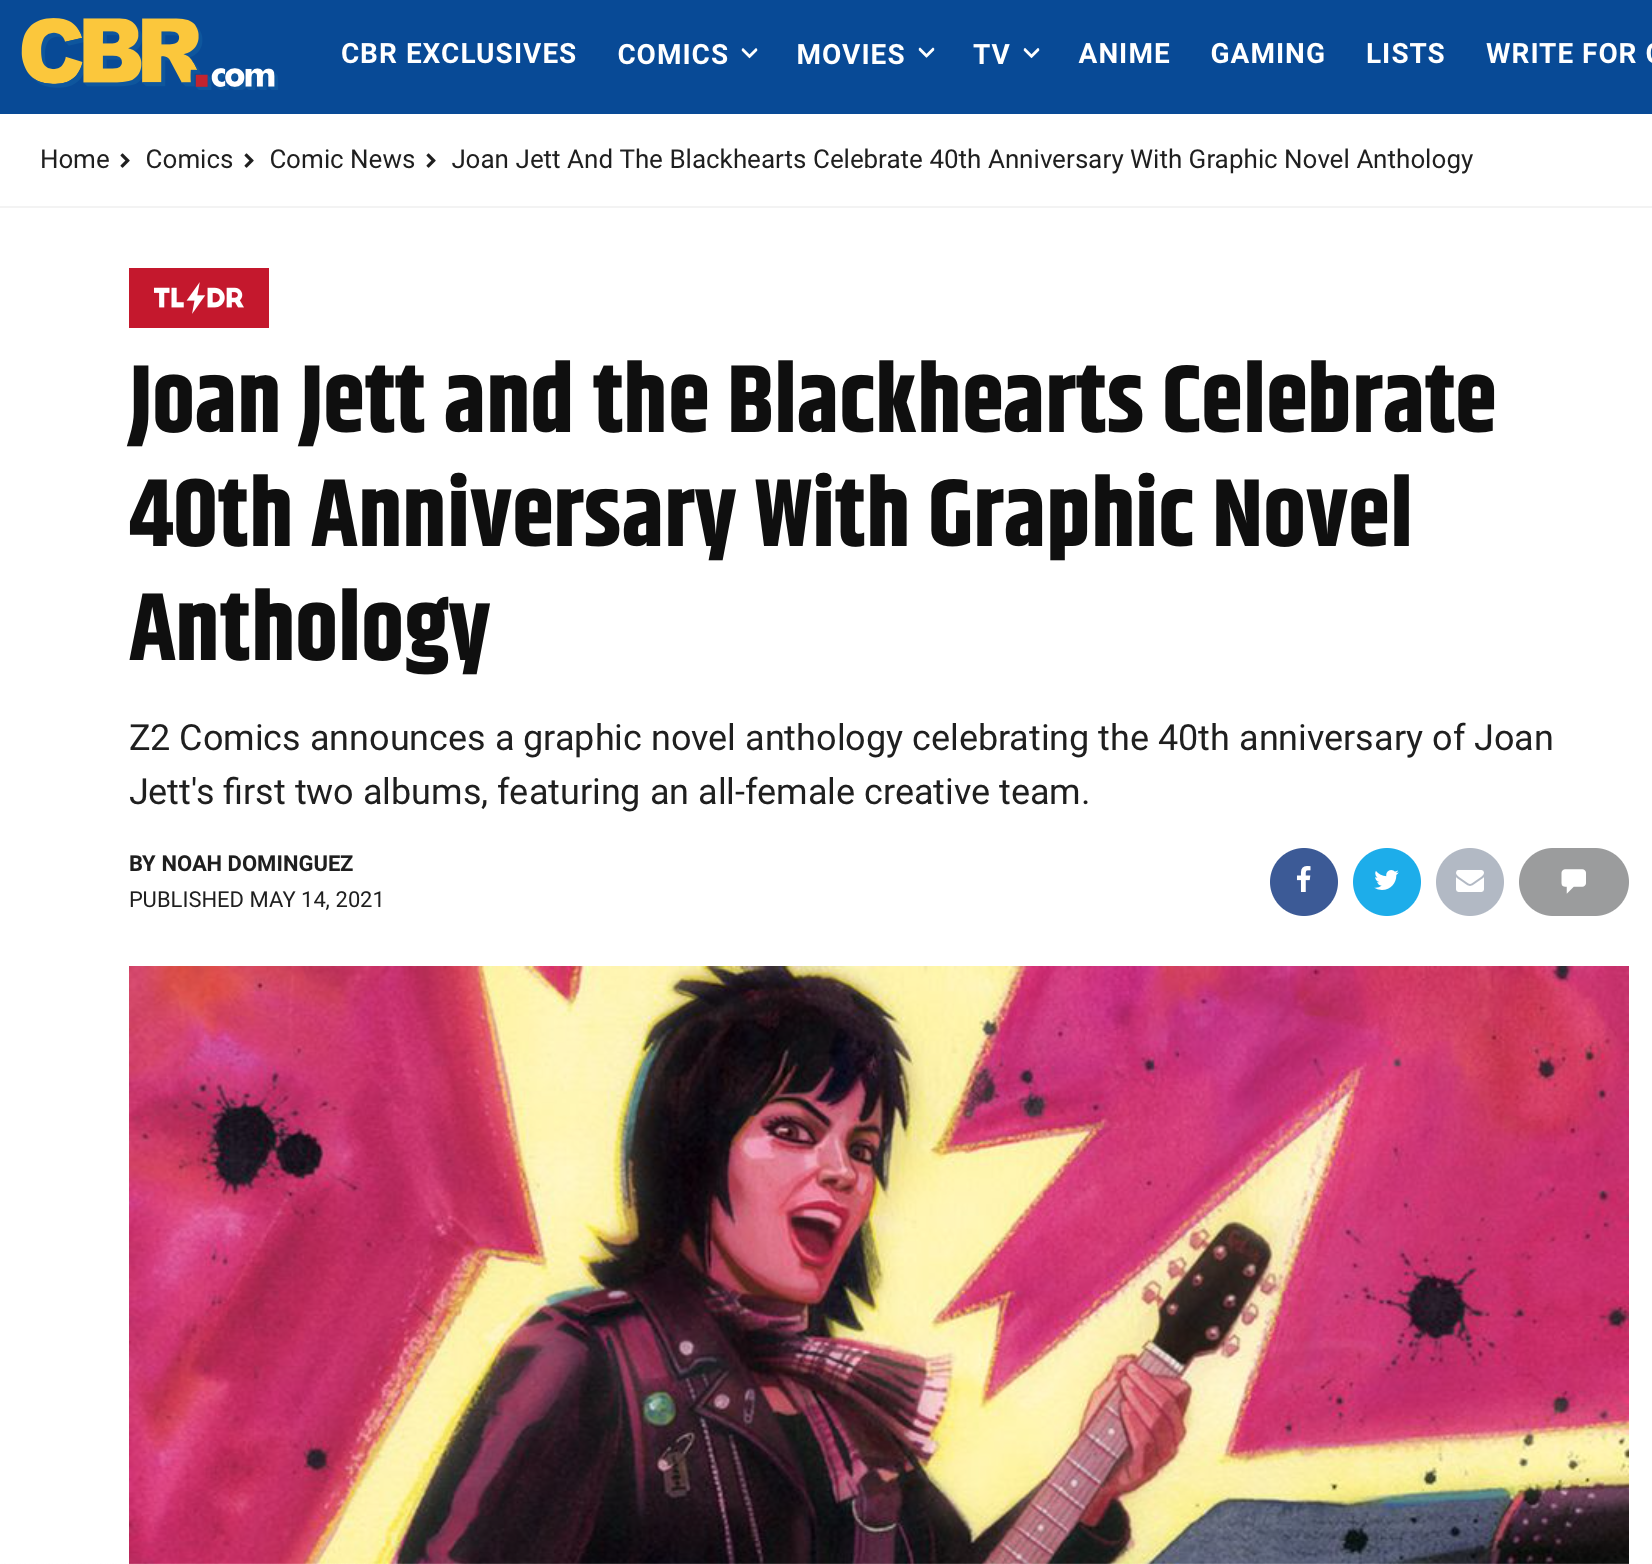 CBR: Joan Jett and the Blackhearts Celebrate 40th Anniversary With Graphic Novel Anthology